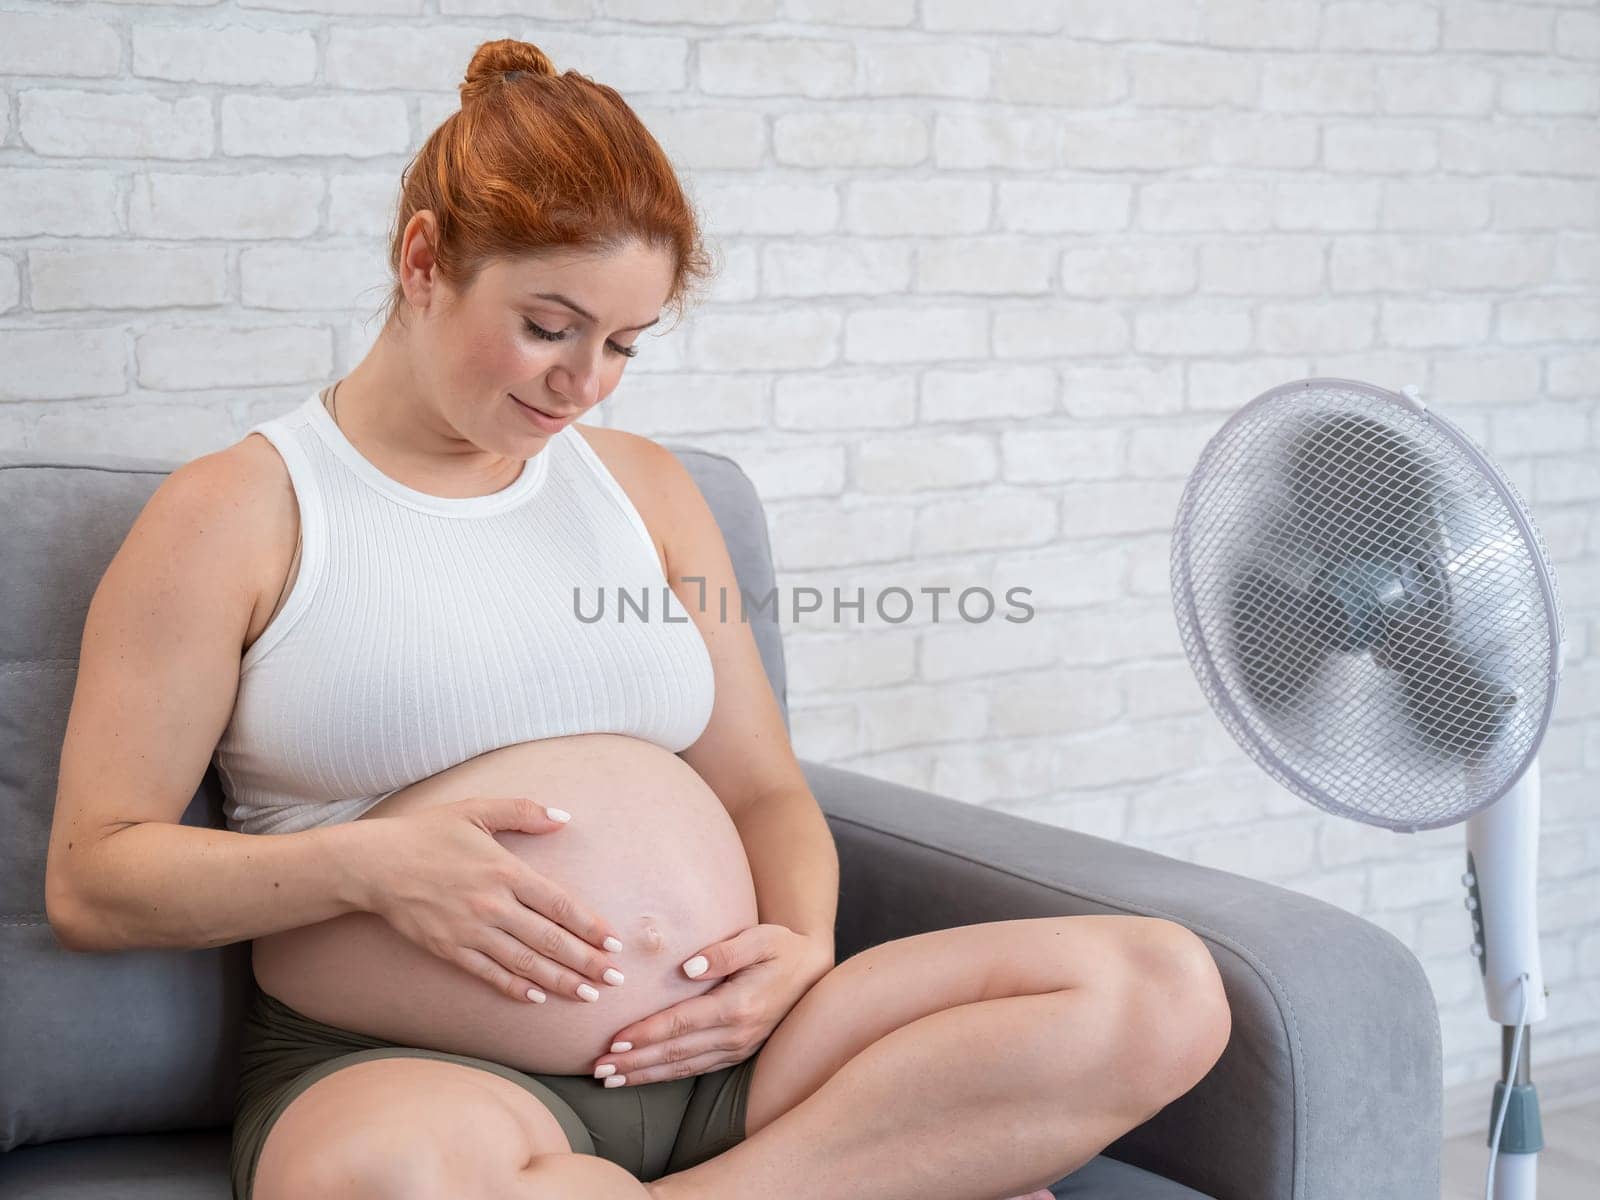 A pregnant woman is sitting on the couch, stroking her tummy and enjoying the cool air from an electric fan